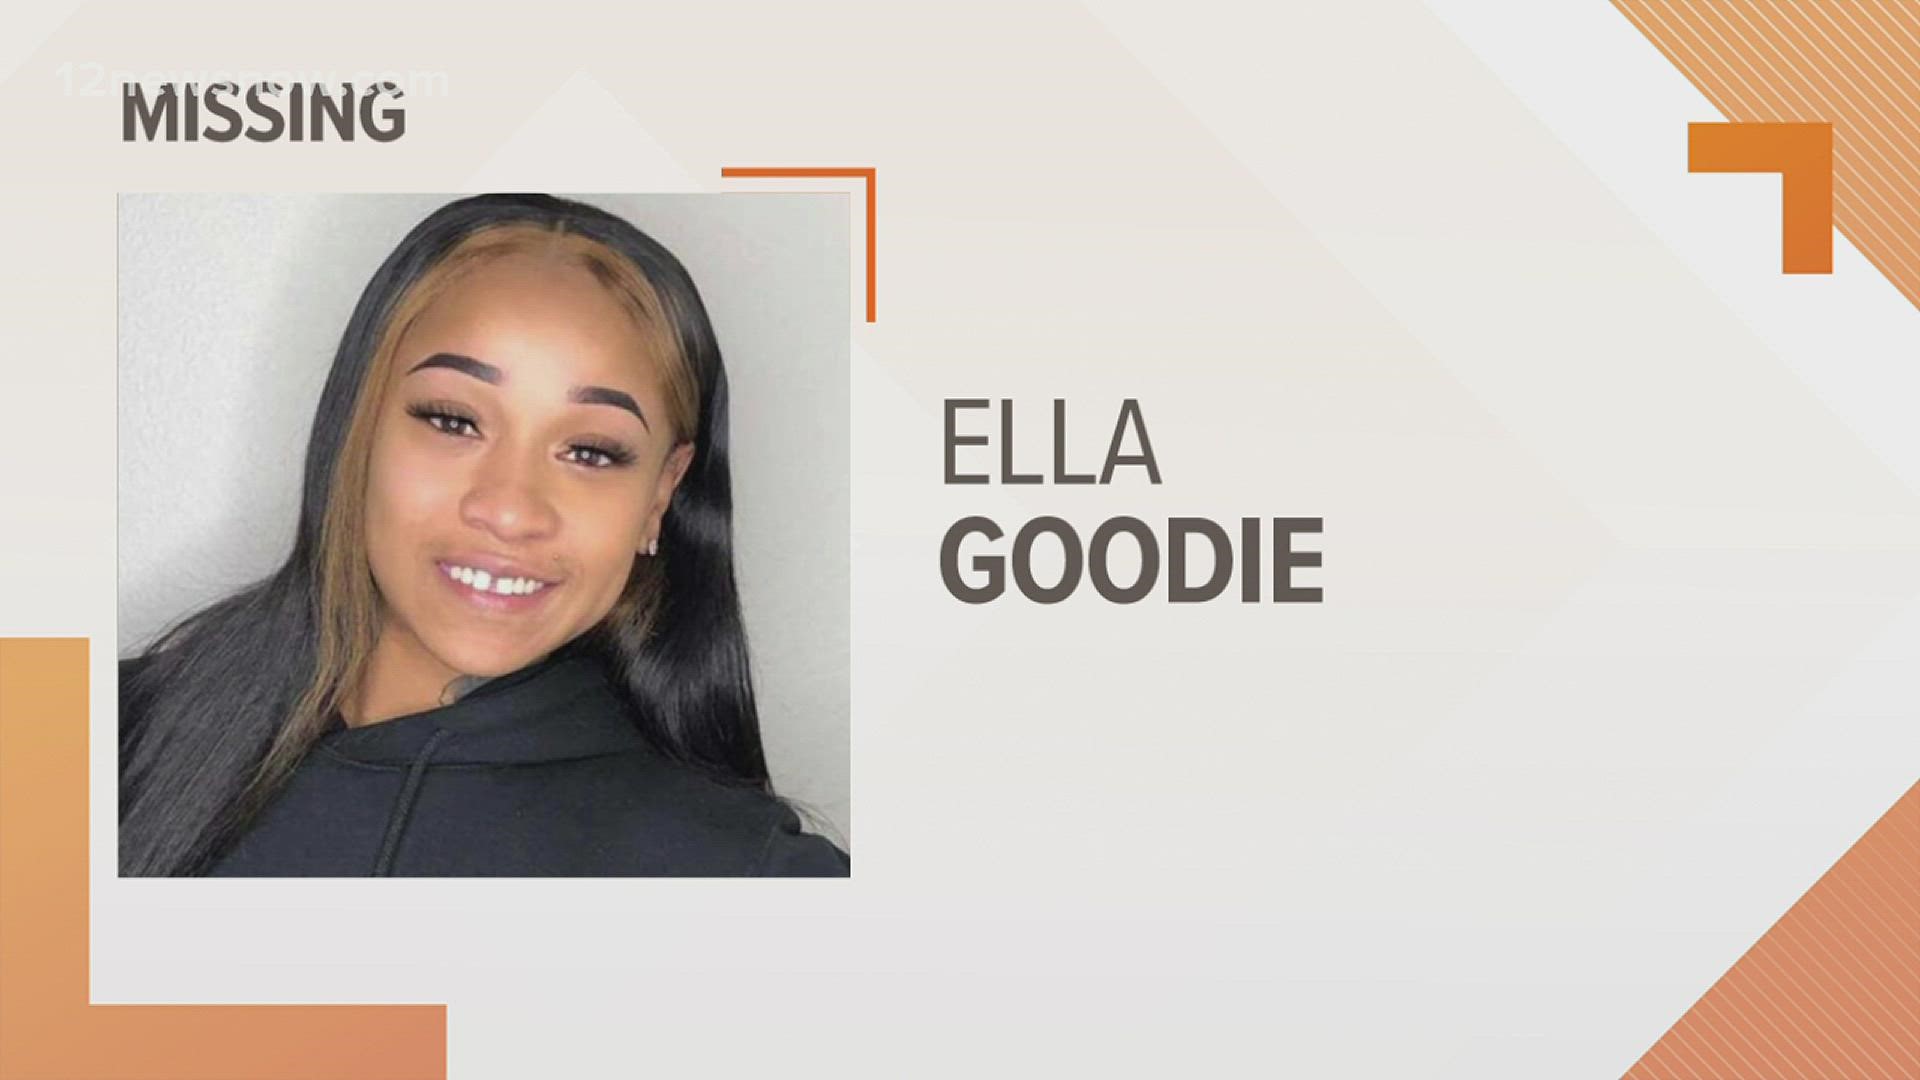 Ella Goodie has not been seen or heard from by family members since Wednesday, March 9.